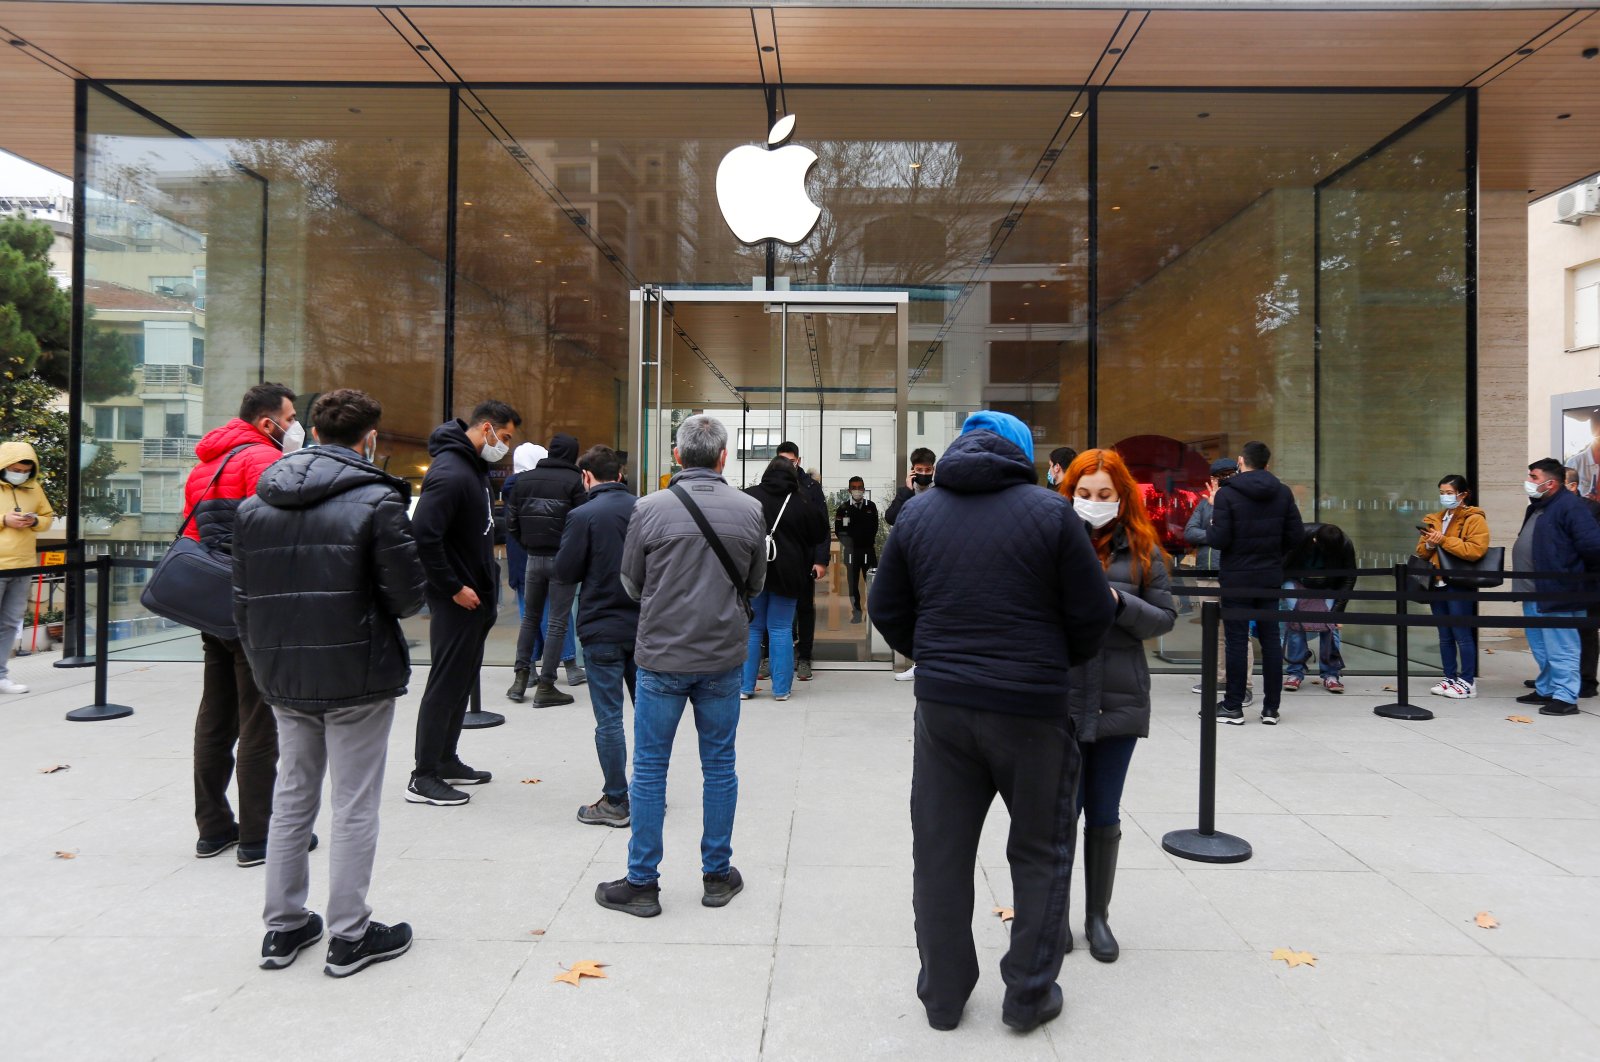 People wait in line to enter an Apple store in Istanbul, Turkey, Nov. 24, 2021. (Reuters Photo)